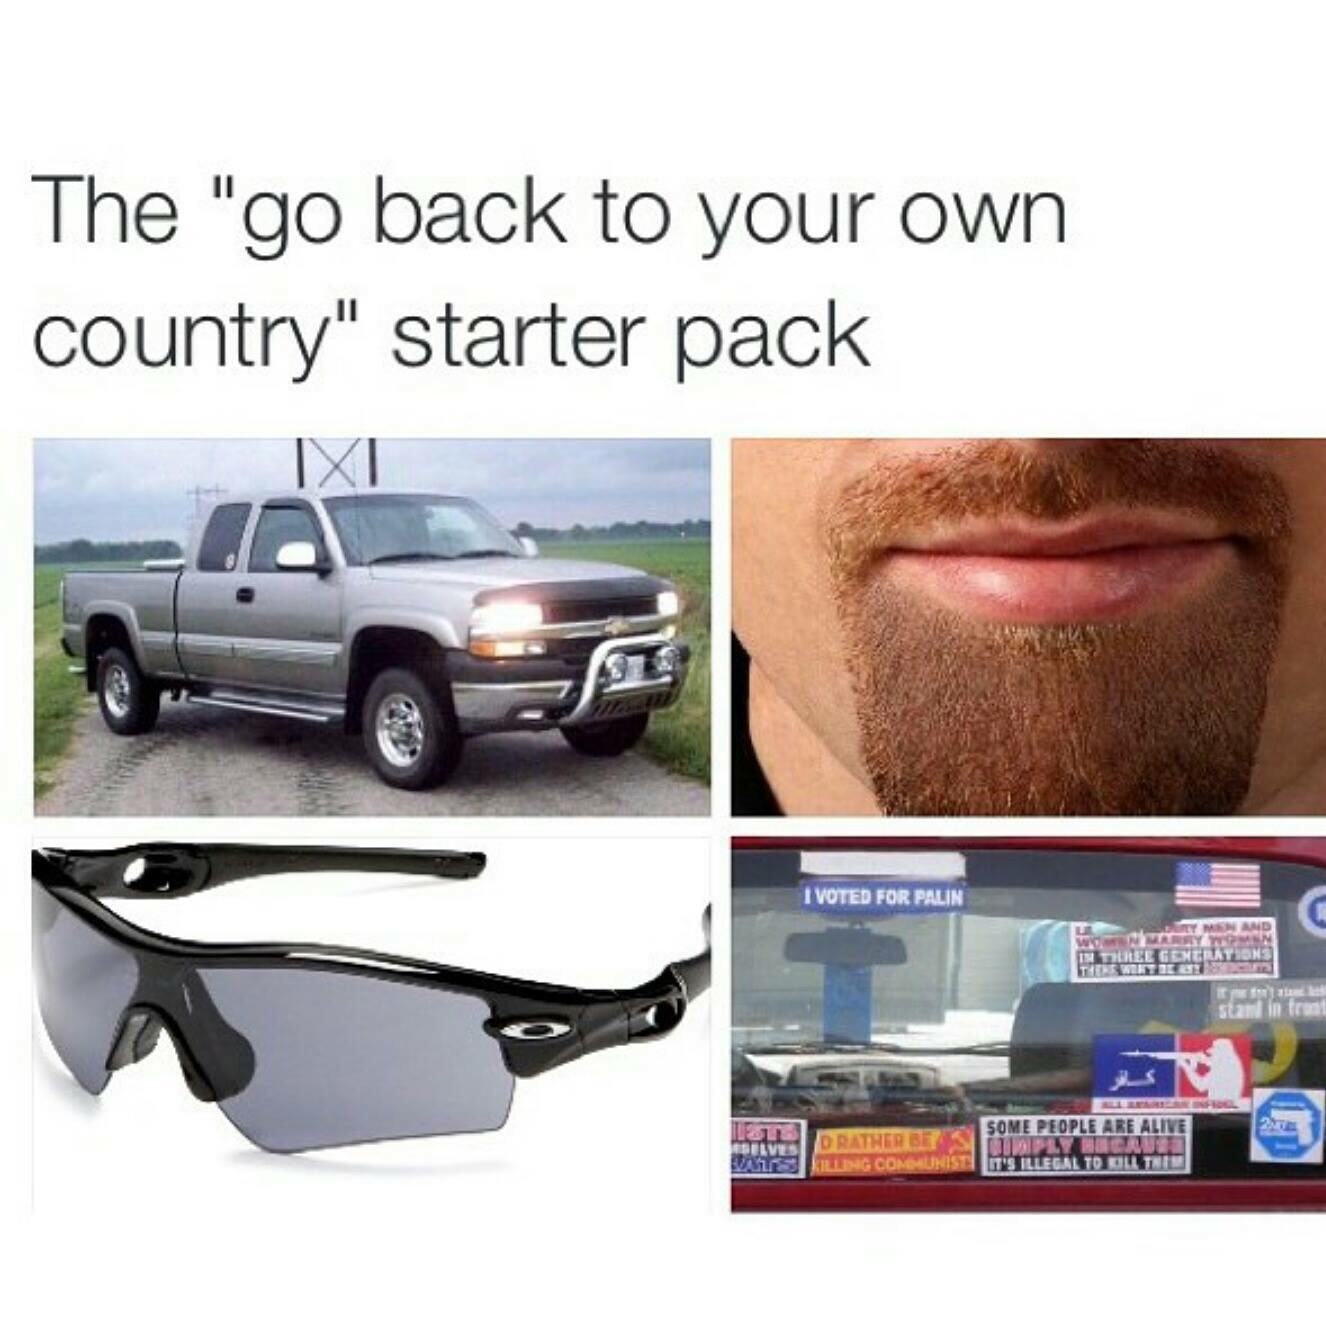 starter pack - go back to your own country - The